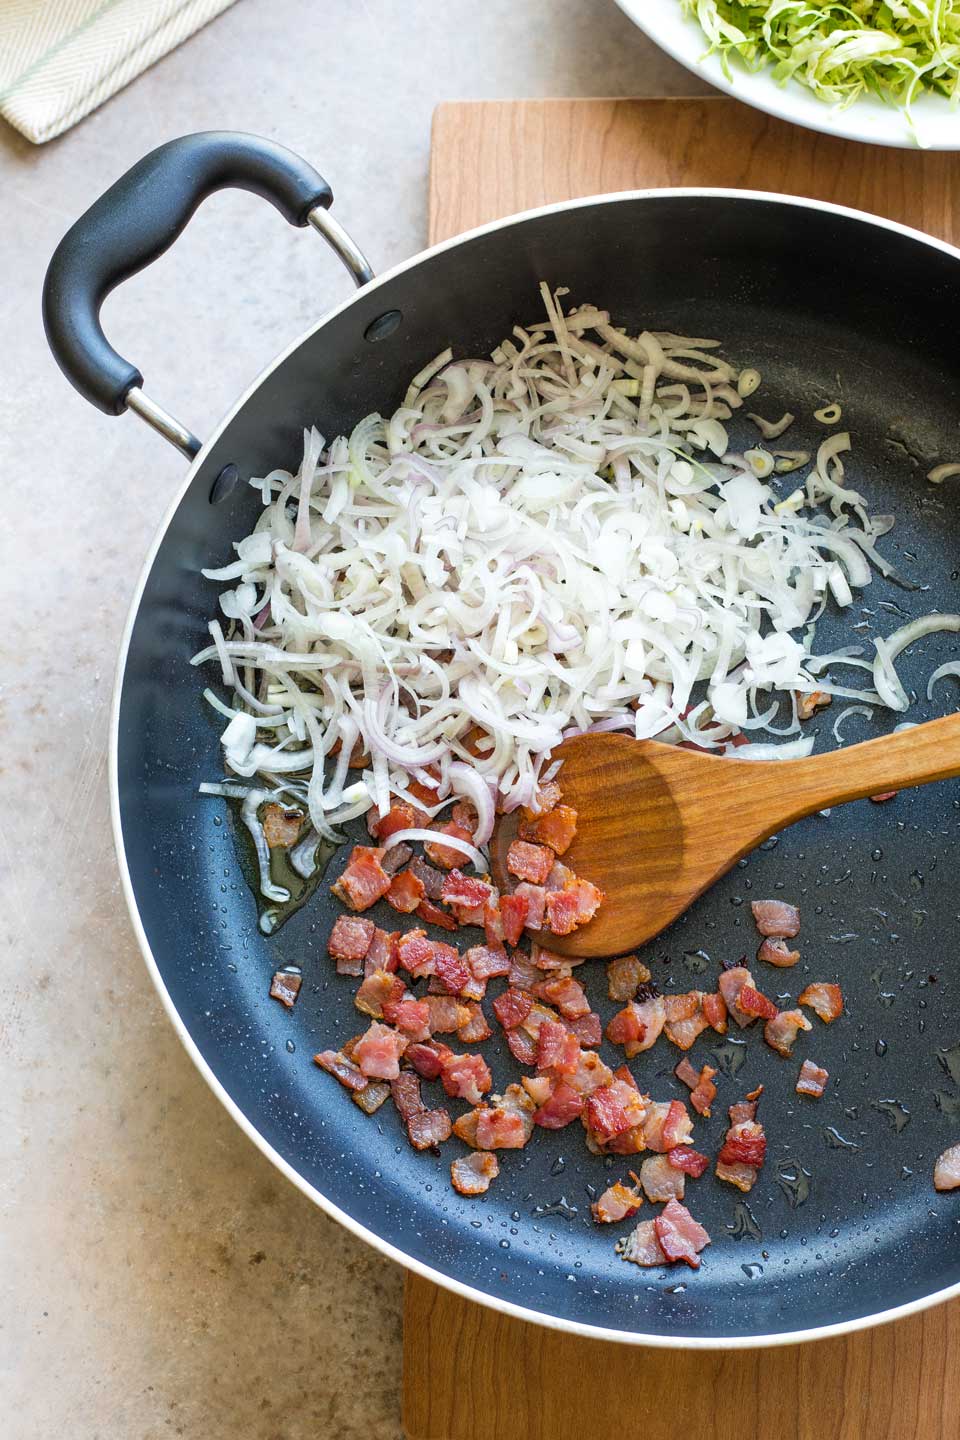 Shredded shallots added to pan with sauteed bacon.